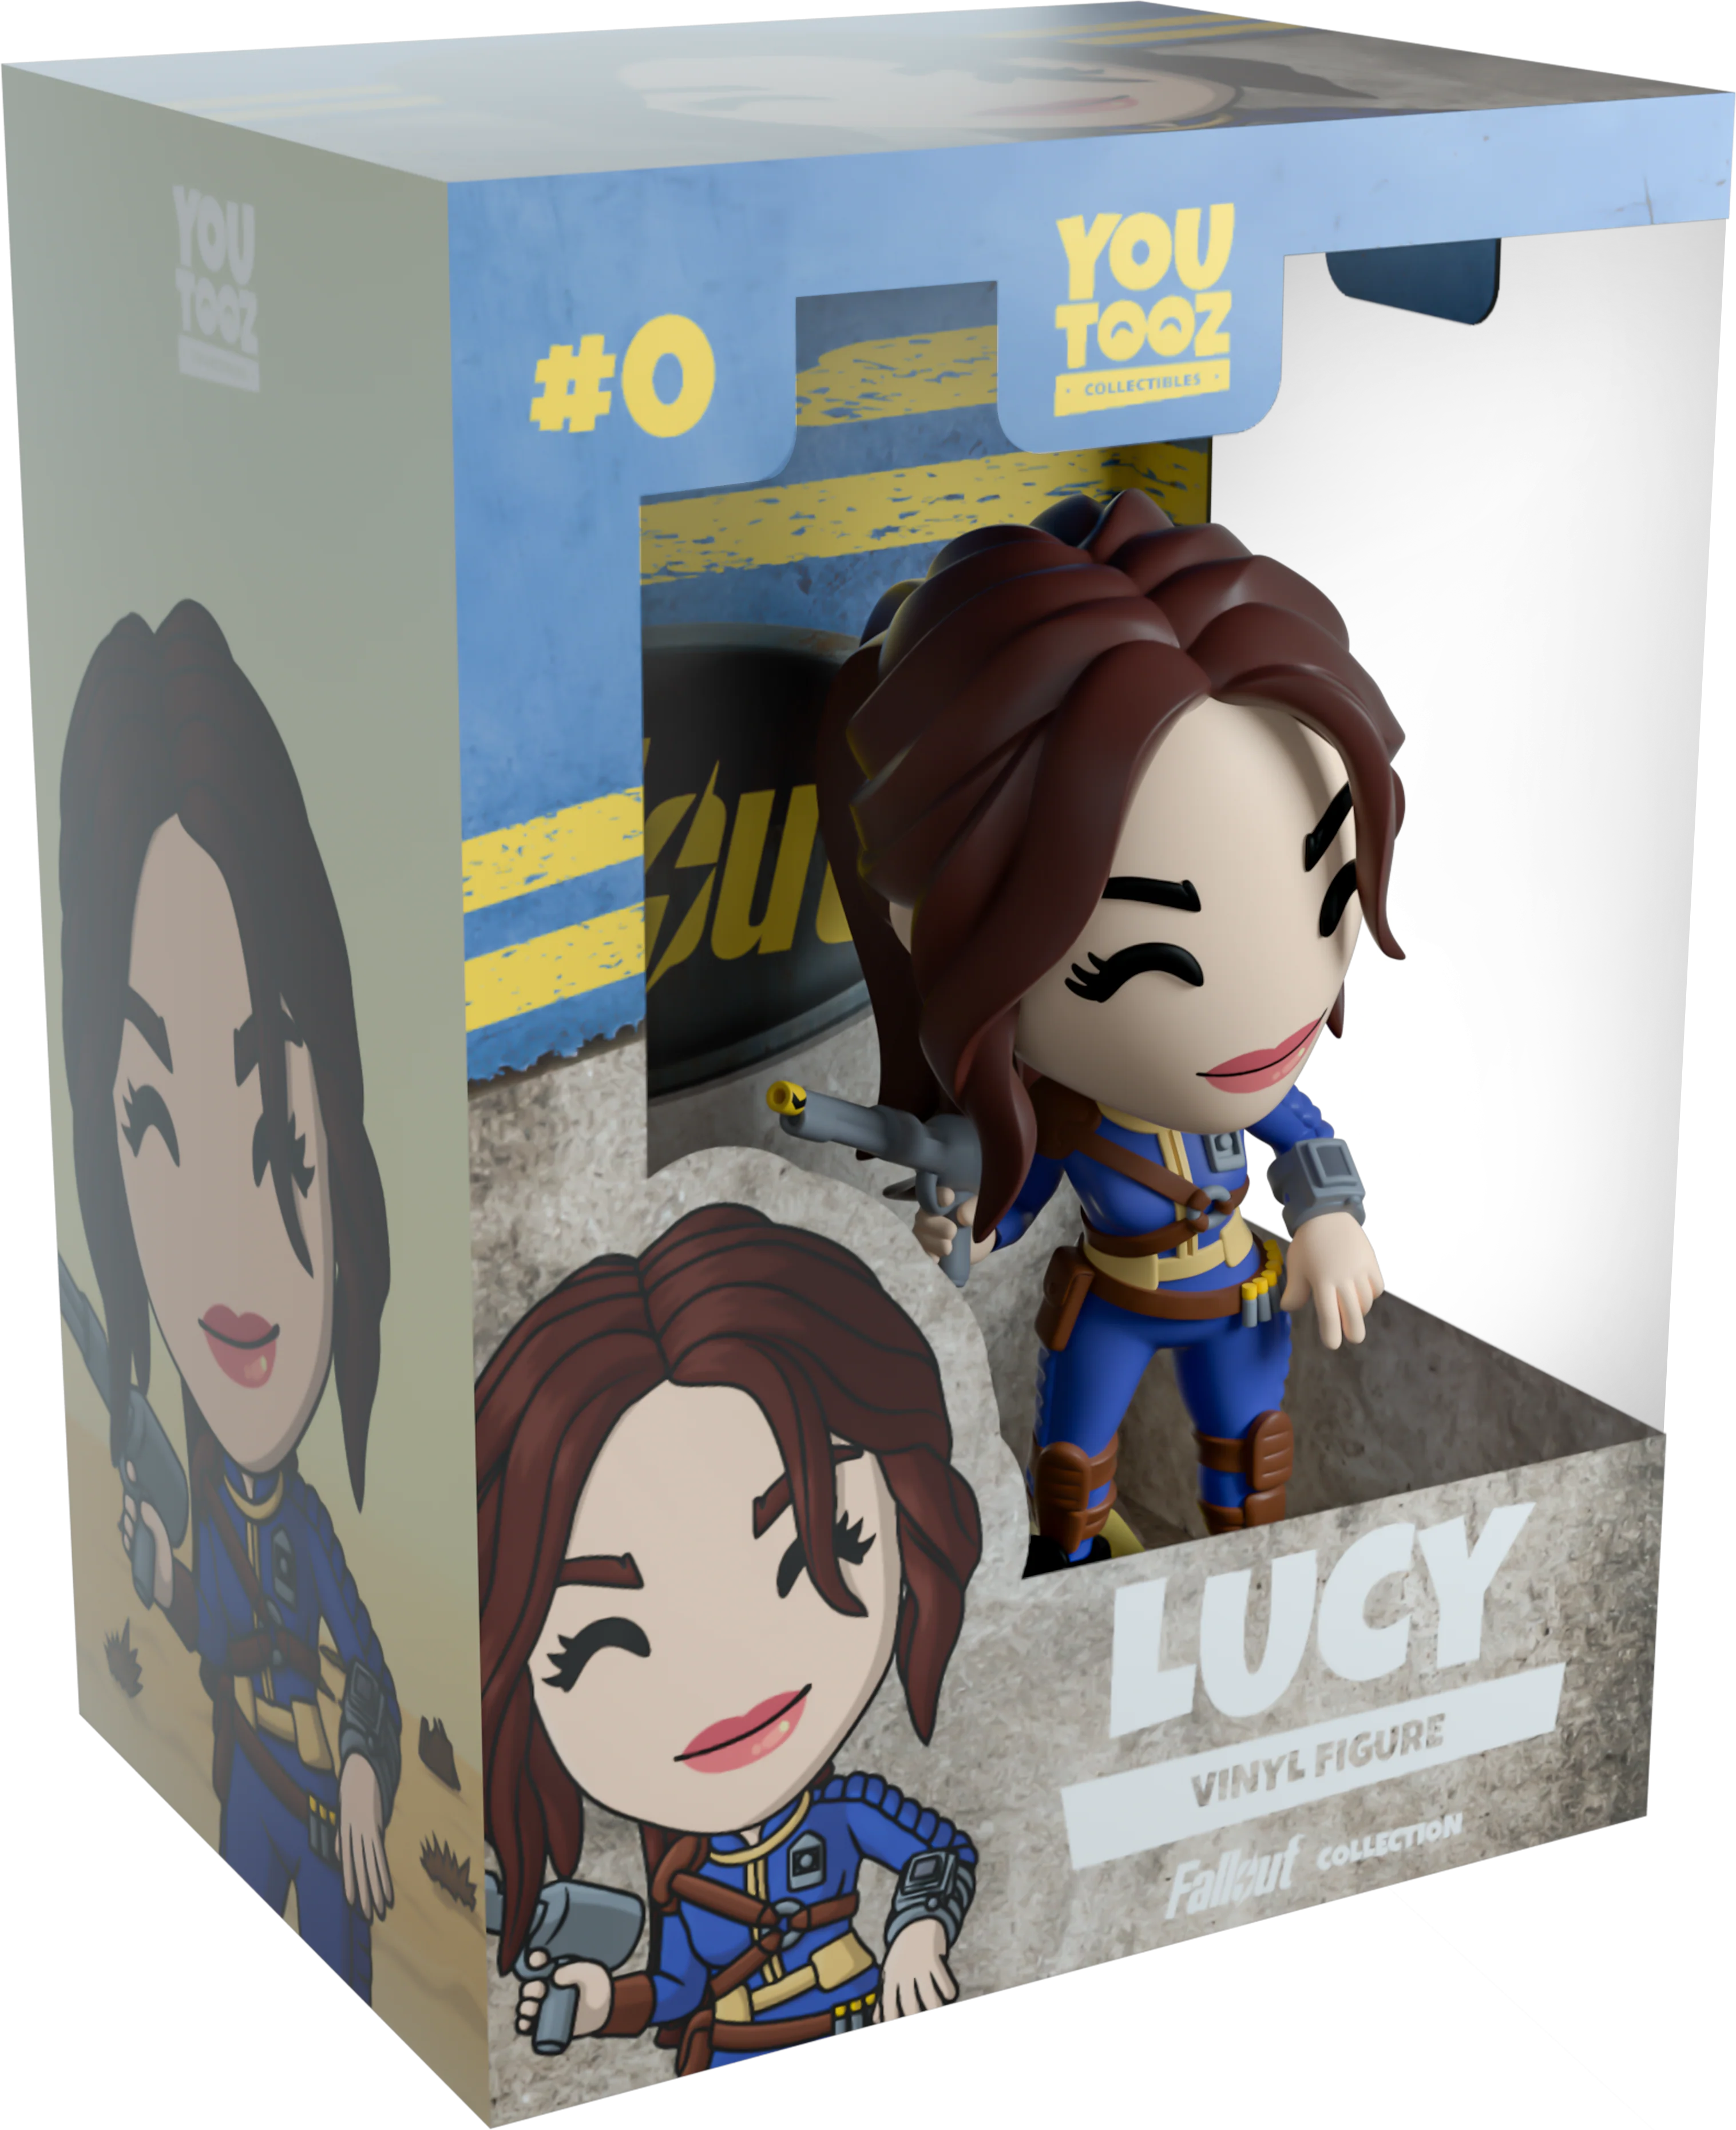 Youtooz - Fallout - Lucy Vinyl Figure #0